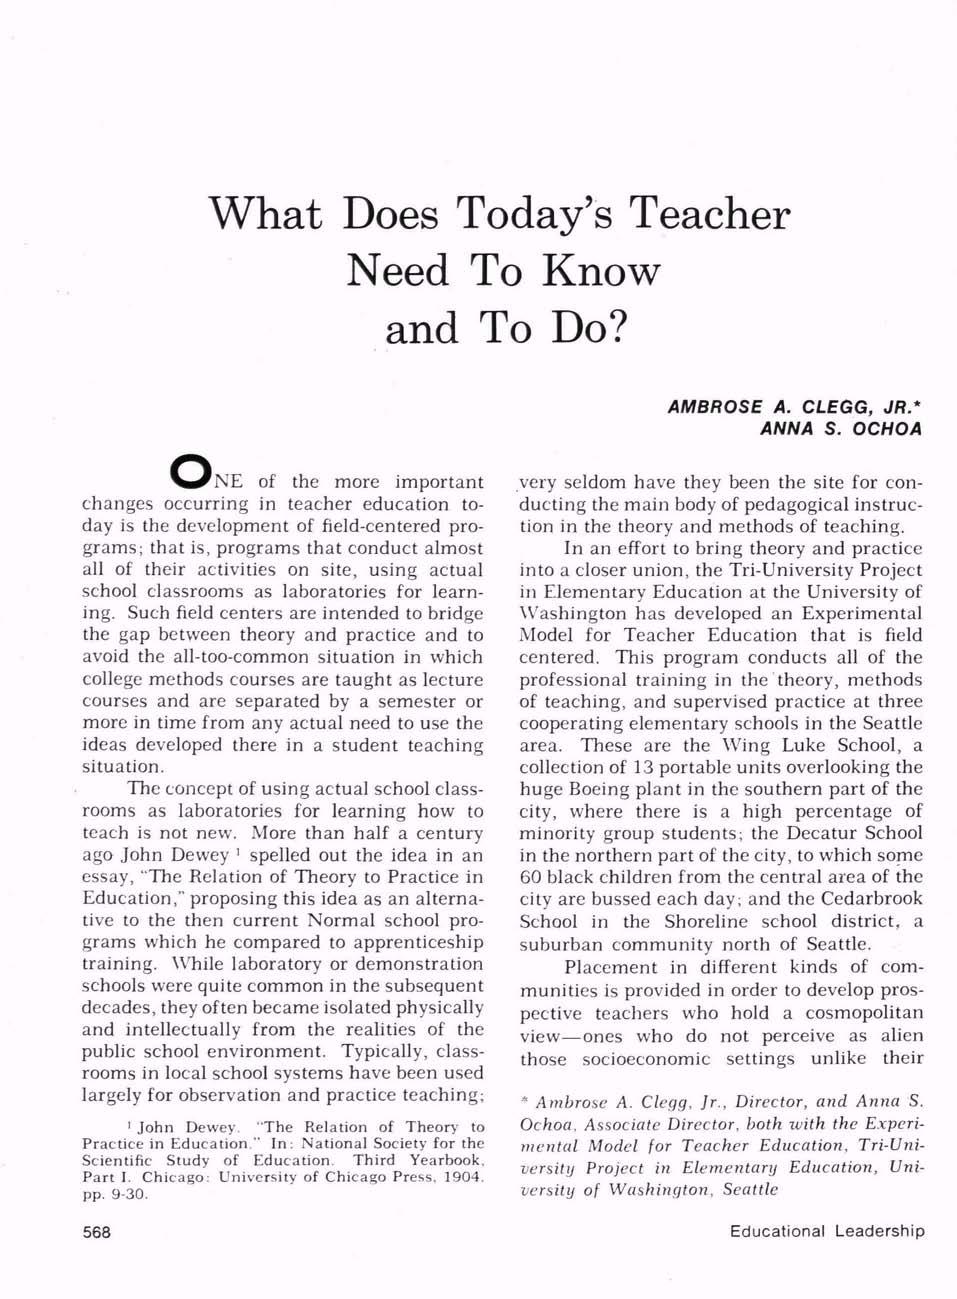 What Does Today's Teacher Need To Know and To Do?